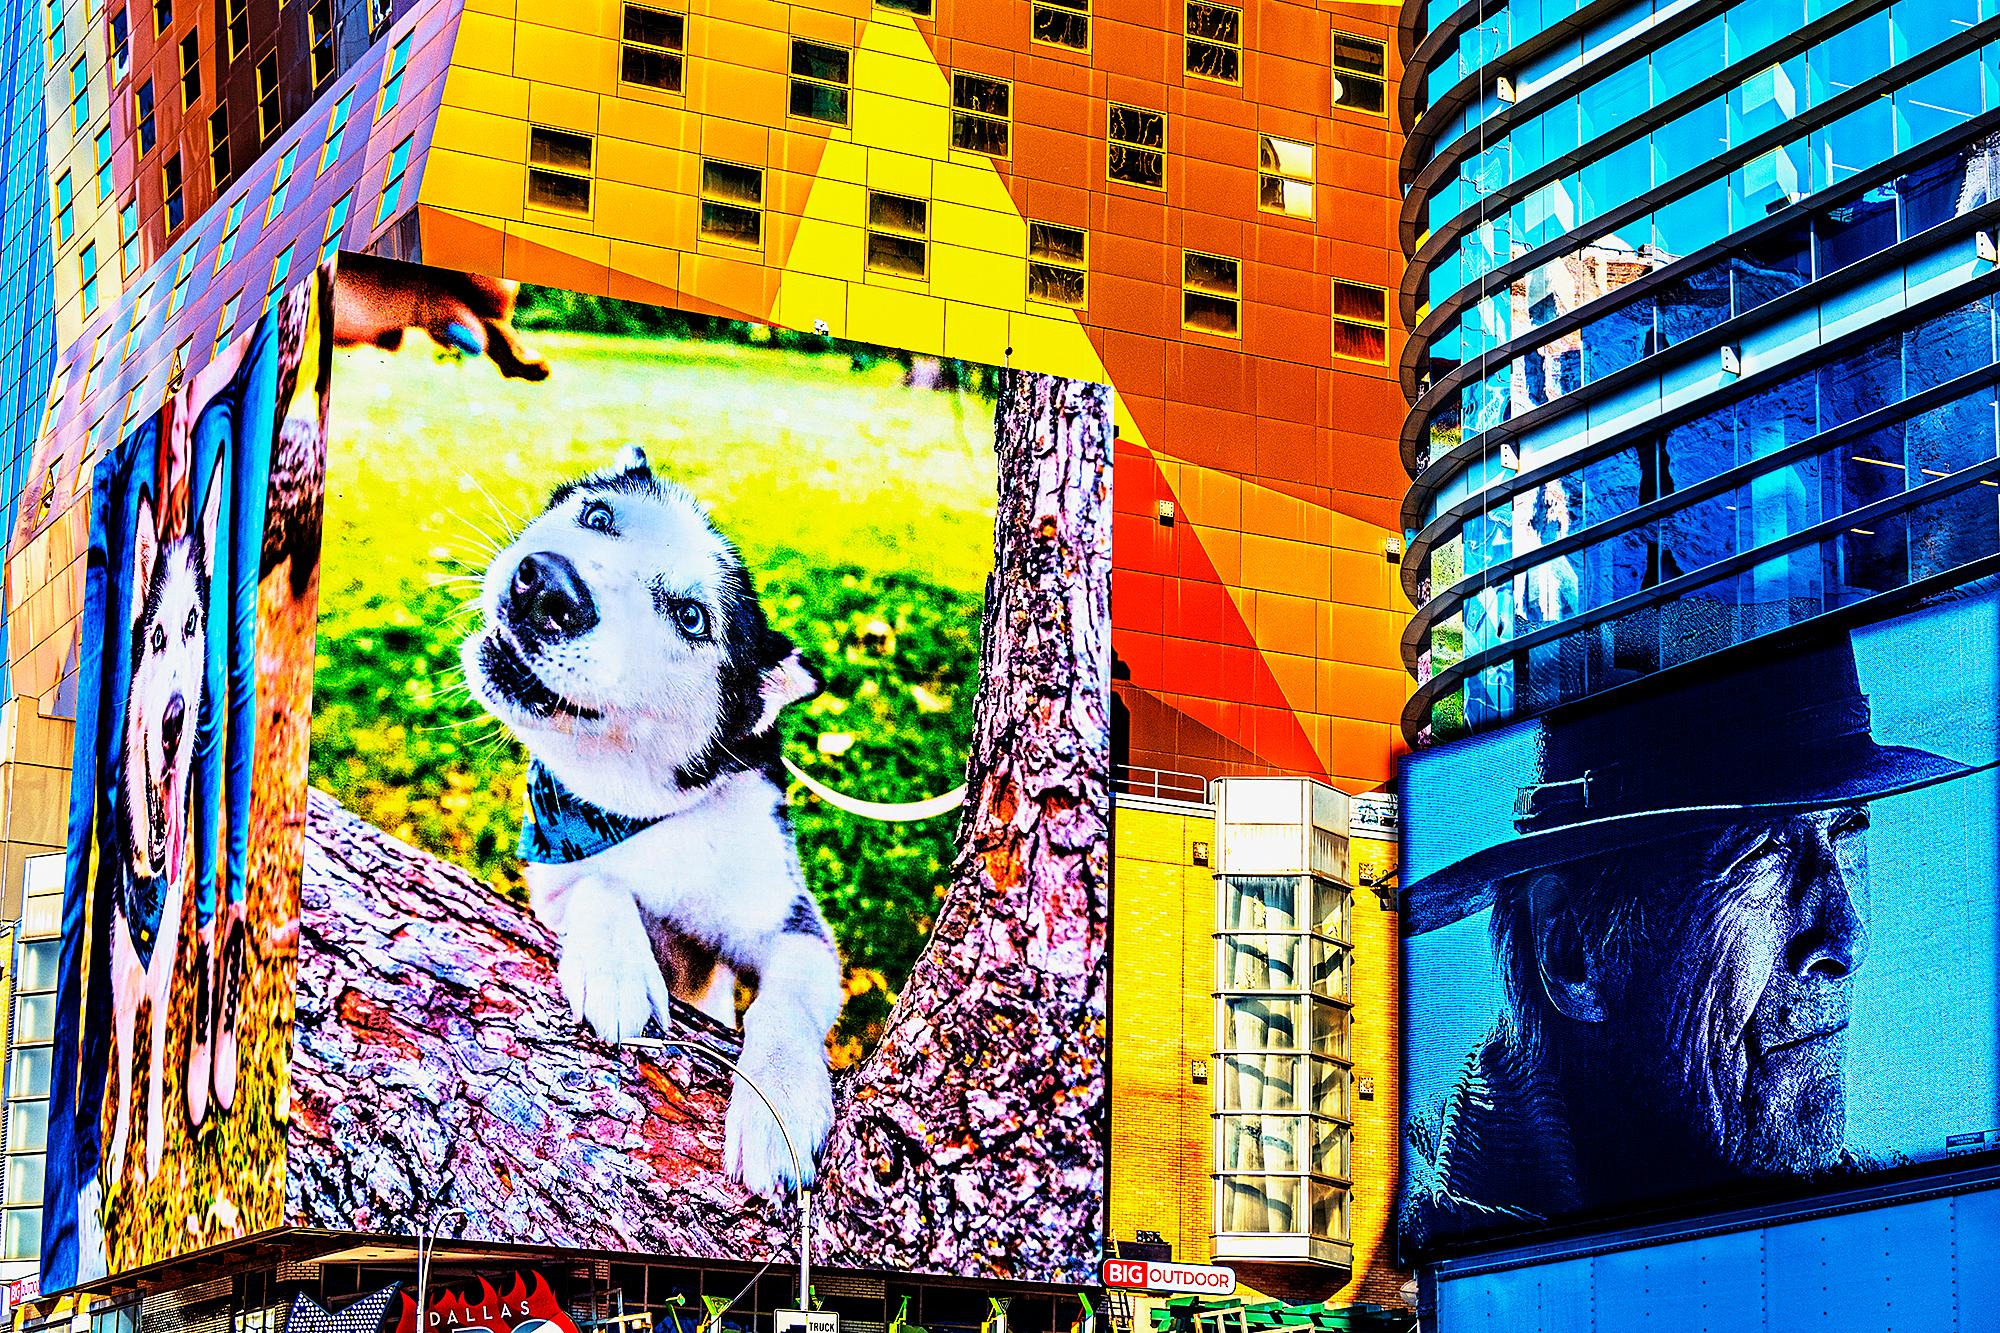 Mitchell Funk Color Photograph - All American Favorites:  Husky Dogs and Clint Eastwood in Times Square